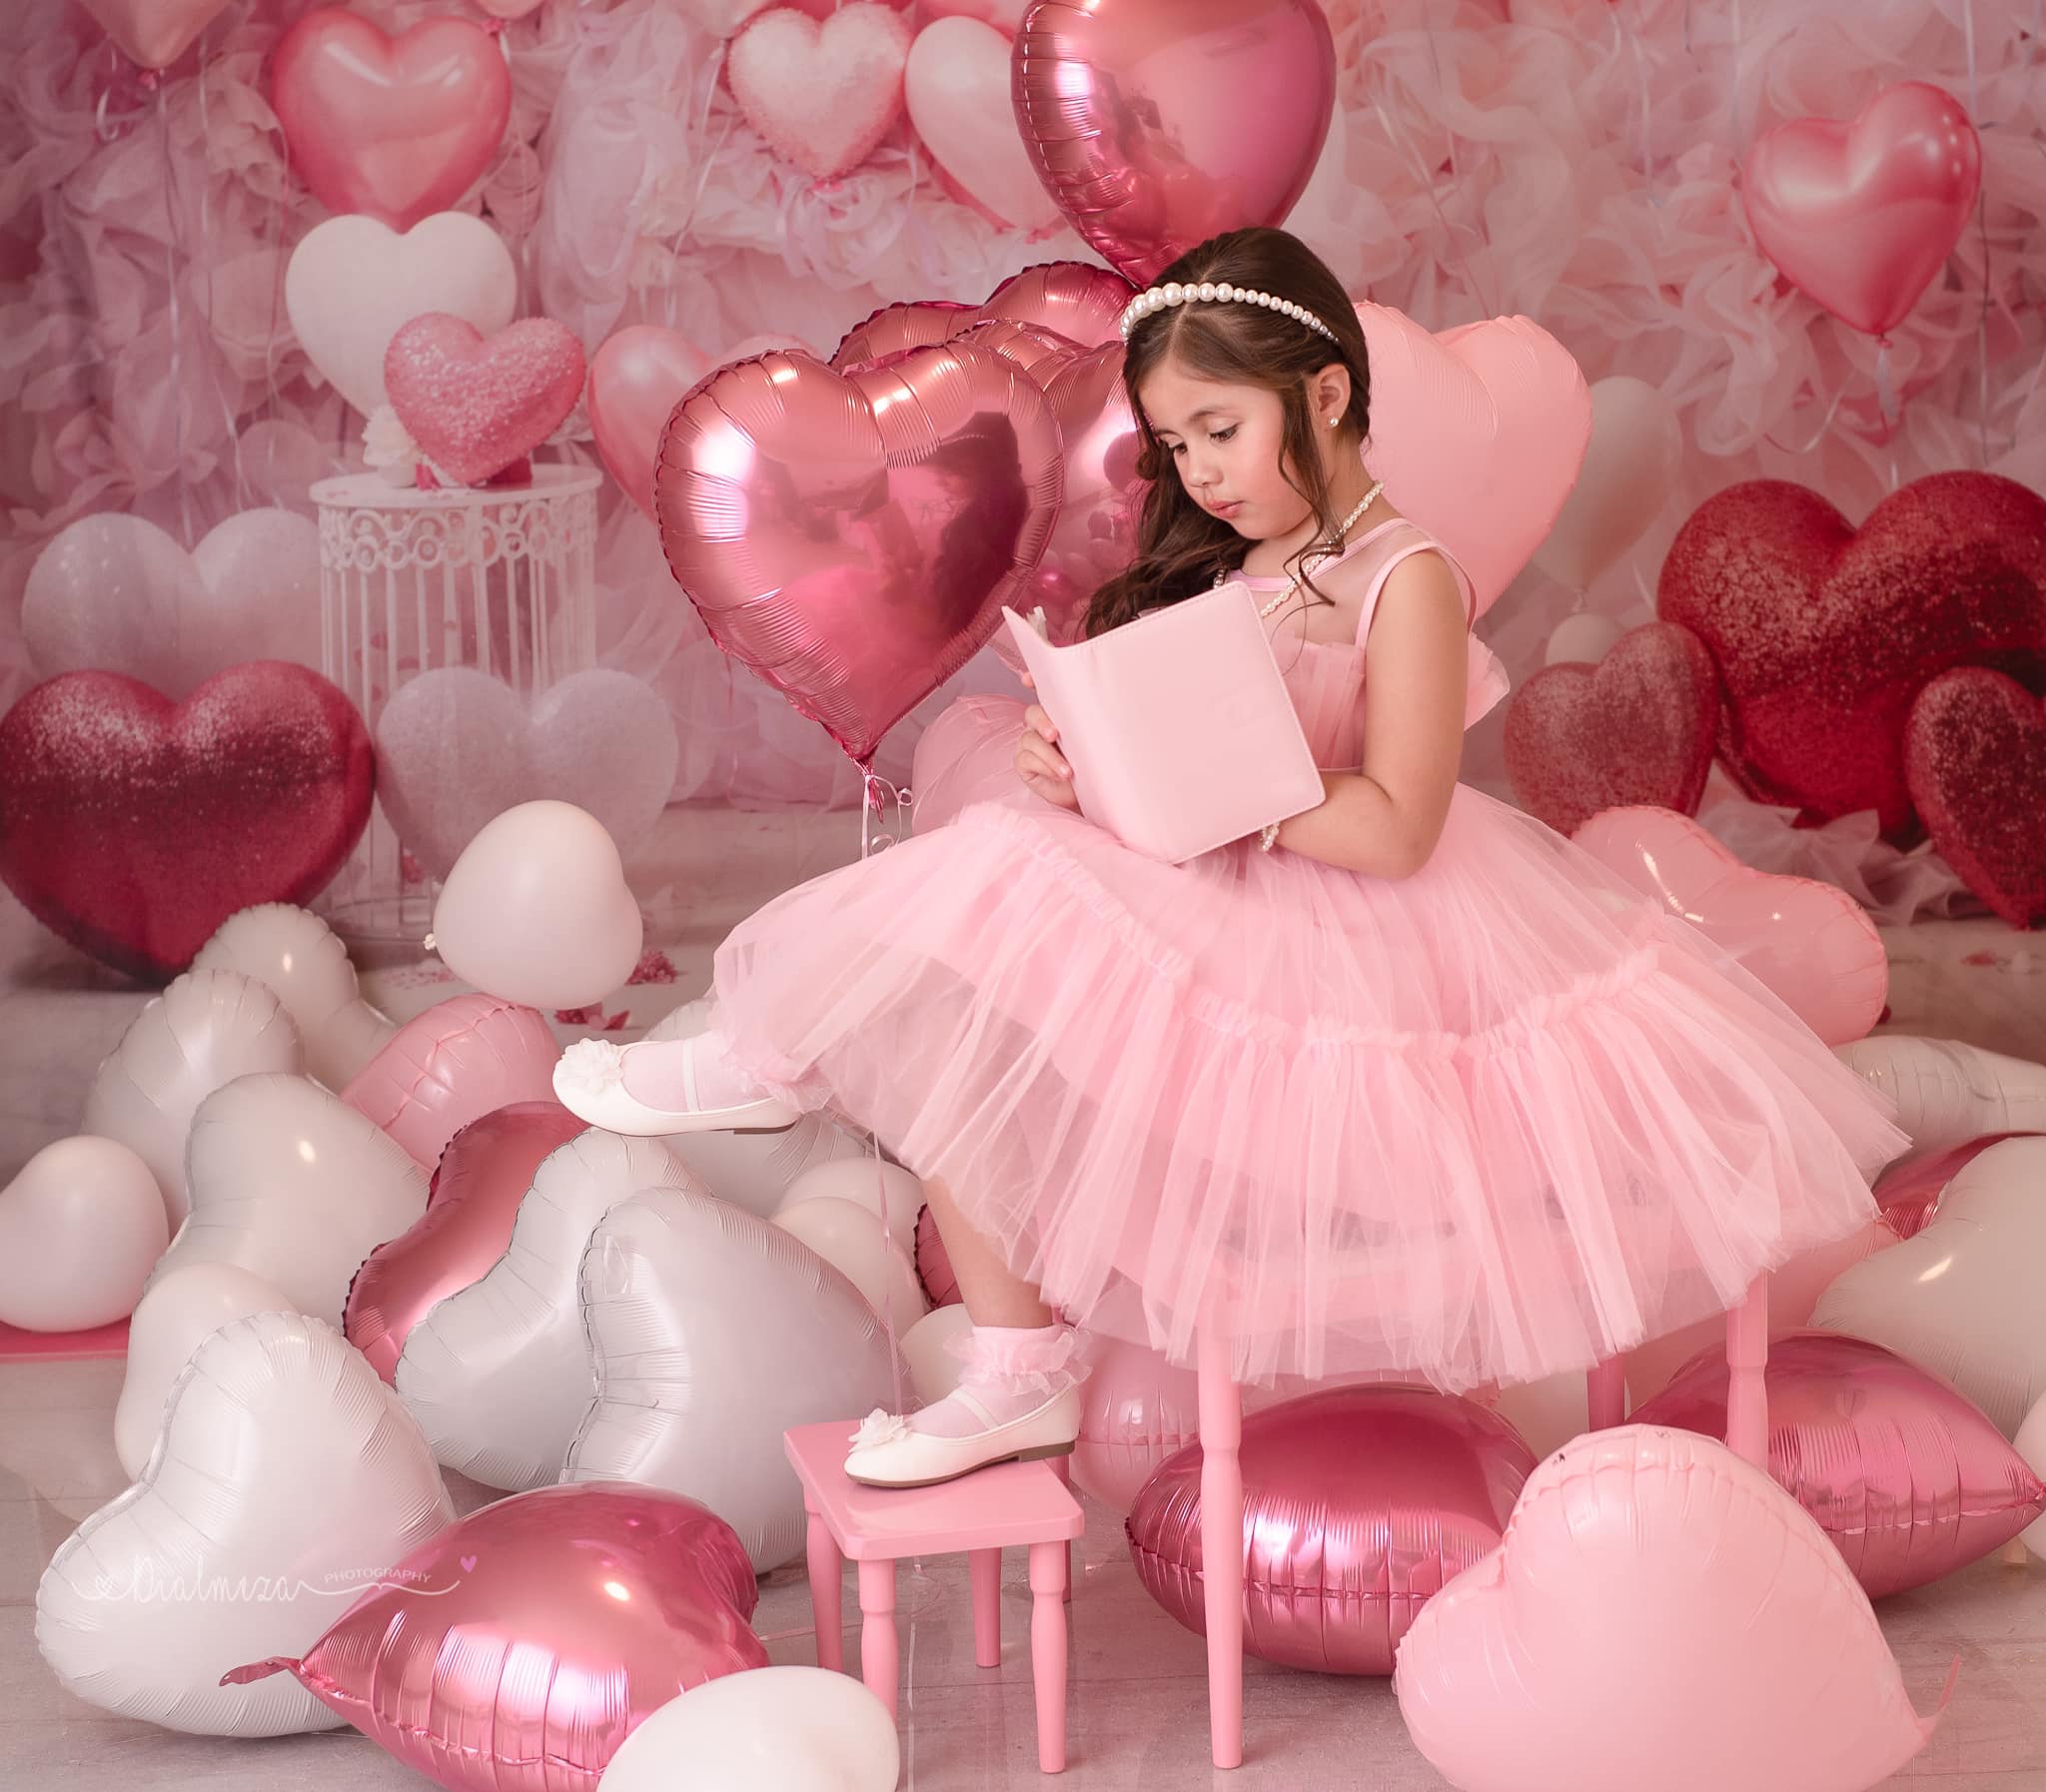 Kate Valentine's Day Pink Love Heart Balloon Room Backdrop Designed by Emetselch